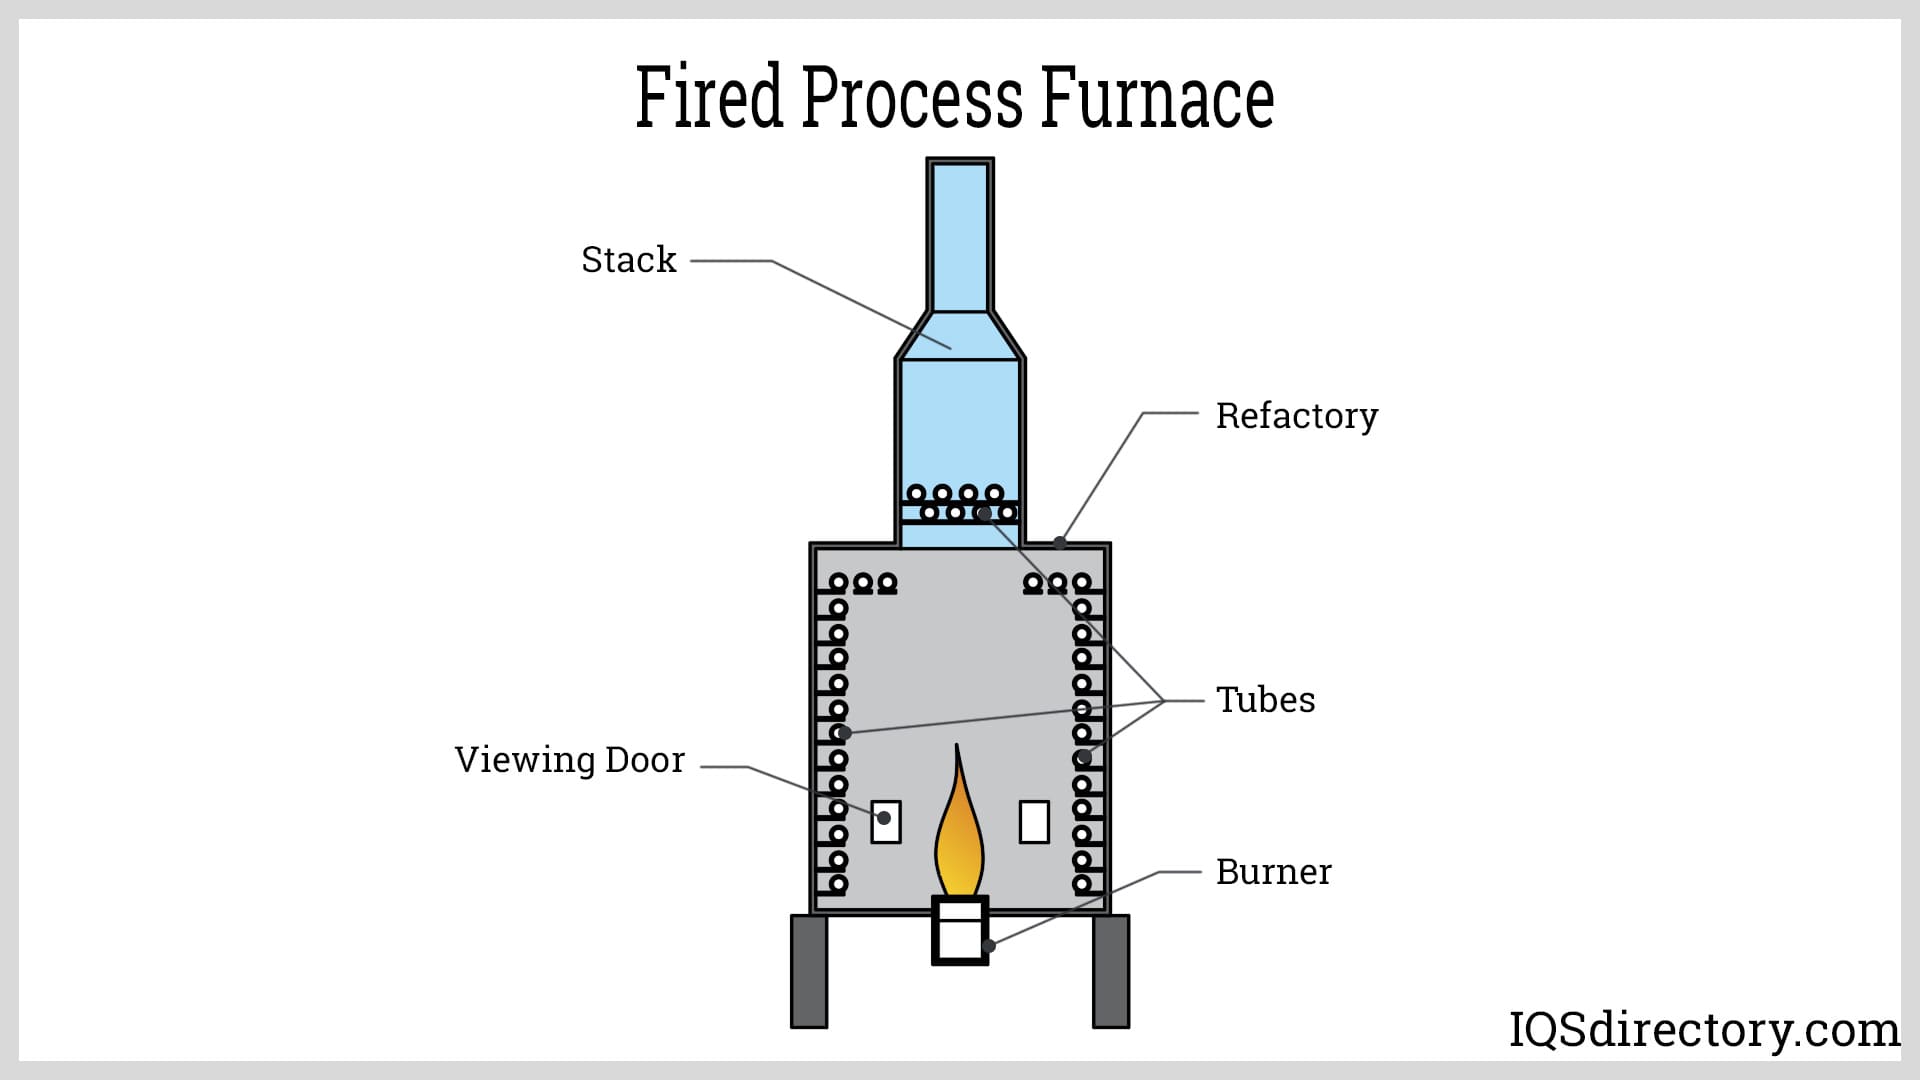 What Is a Furnace?